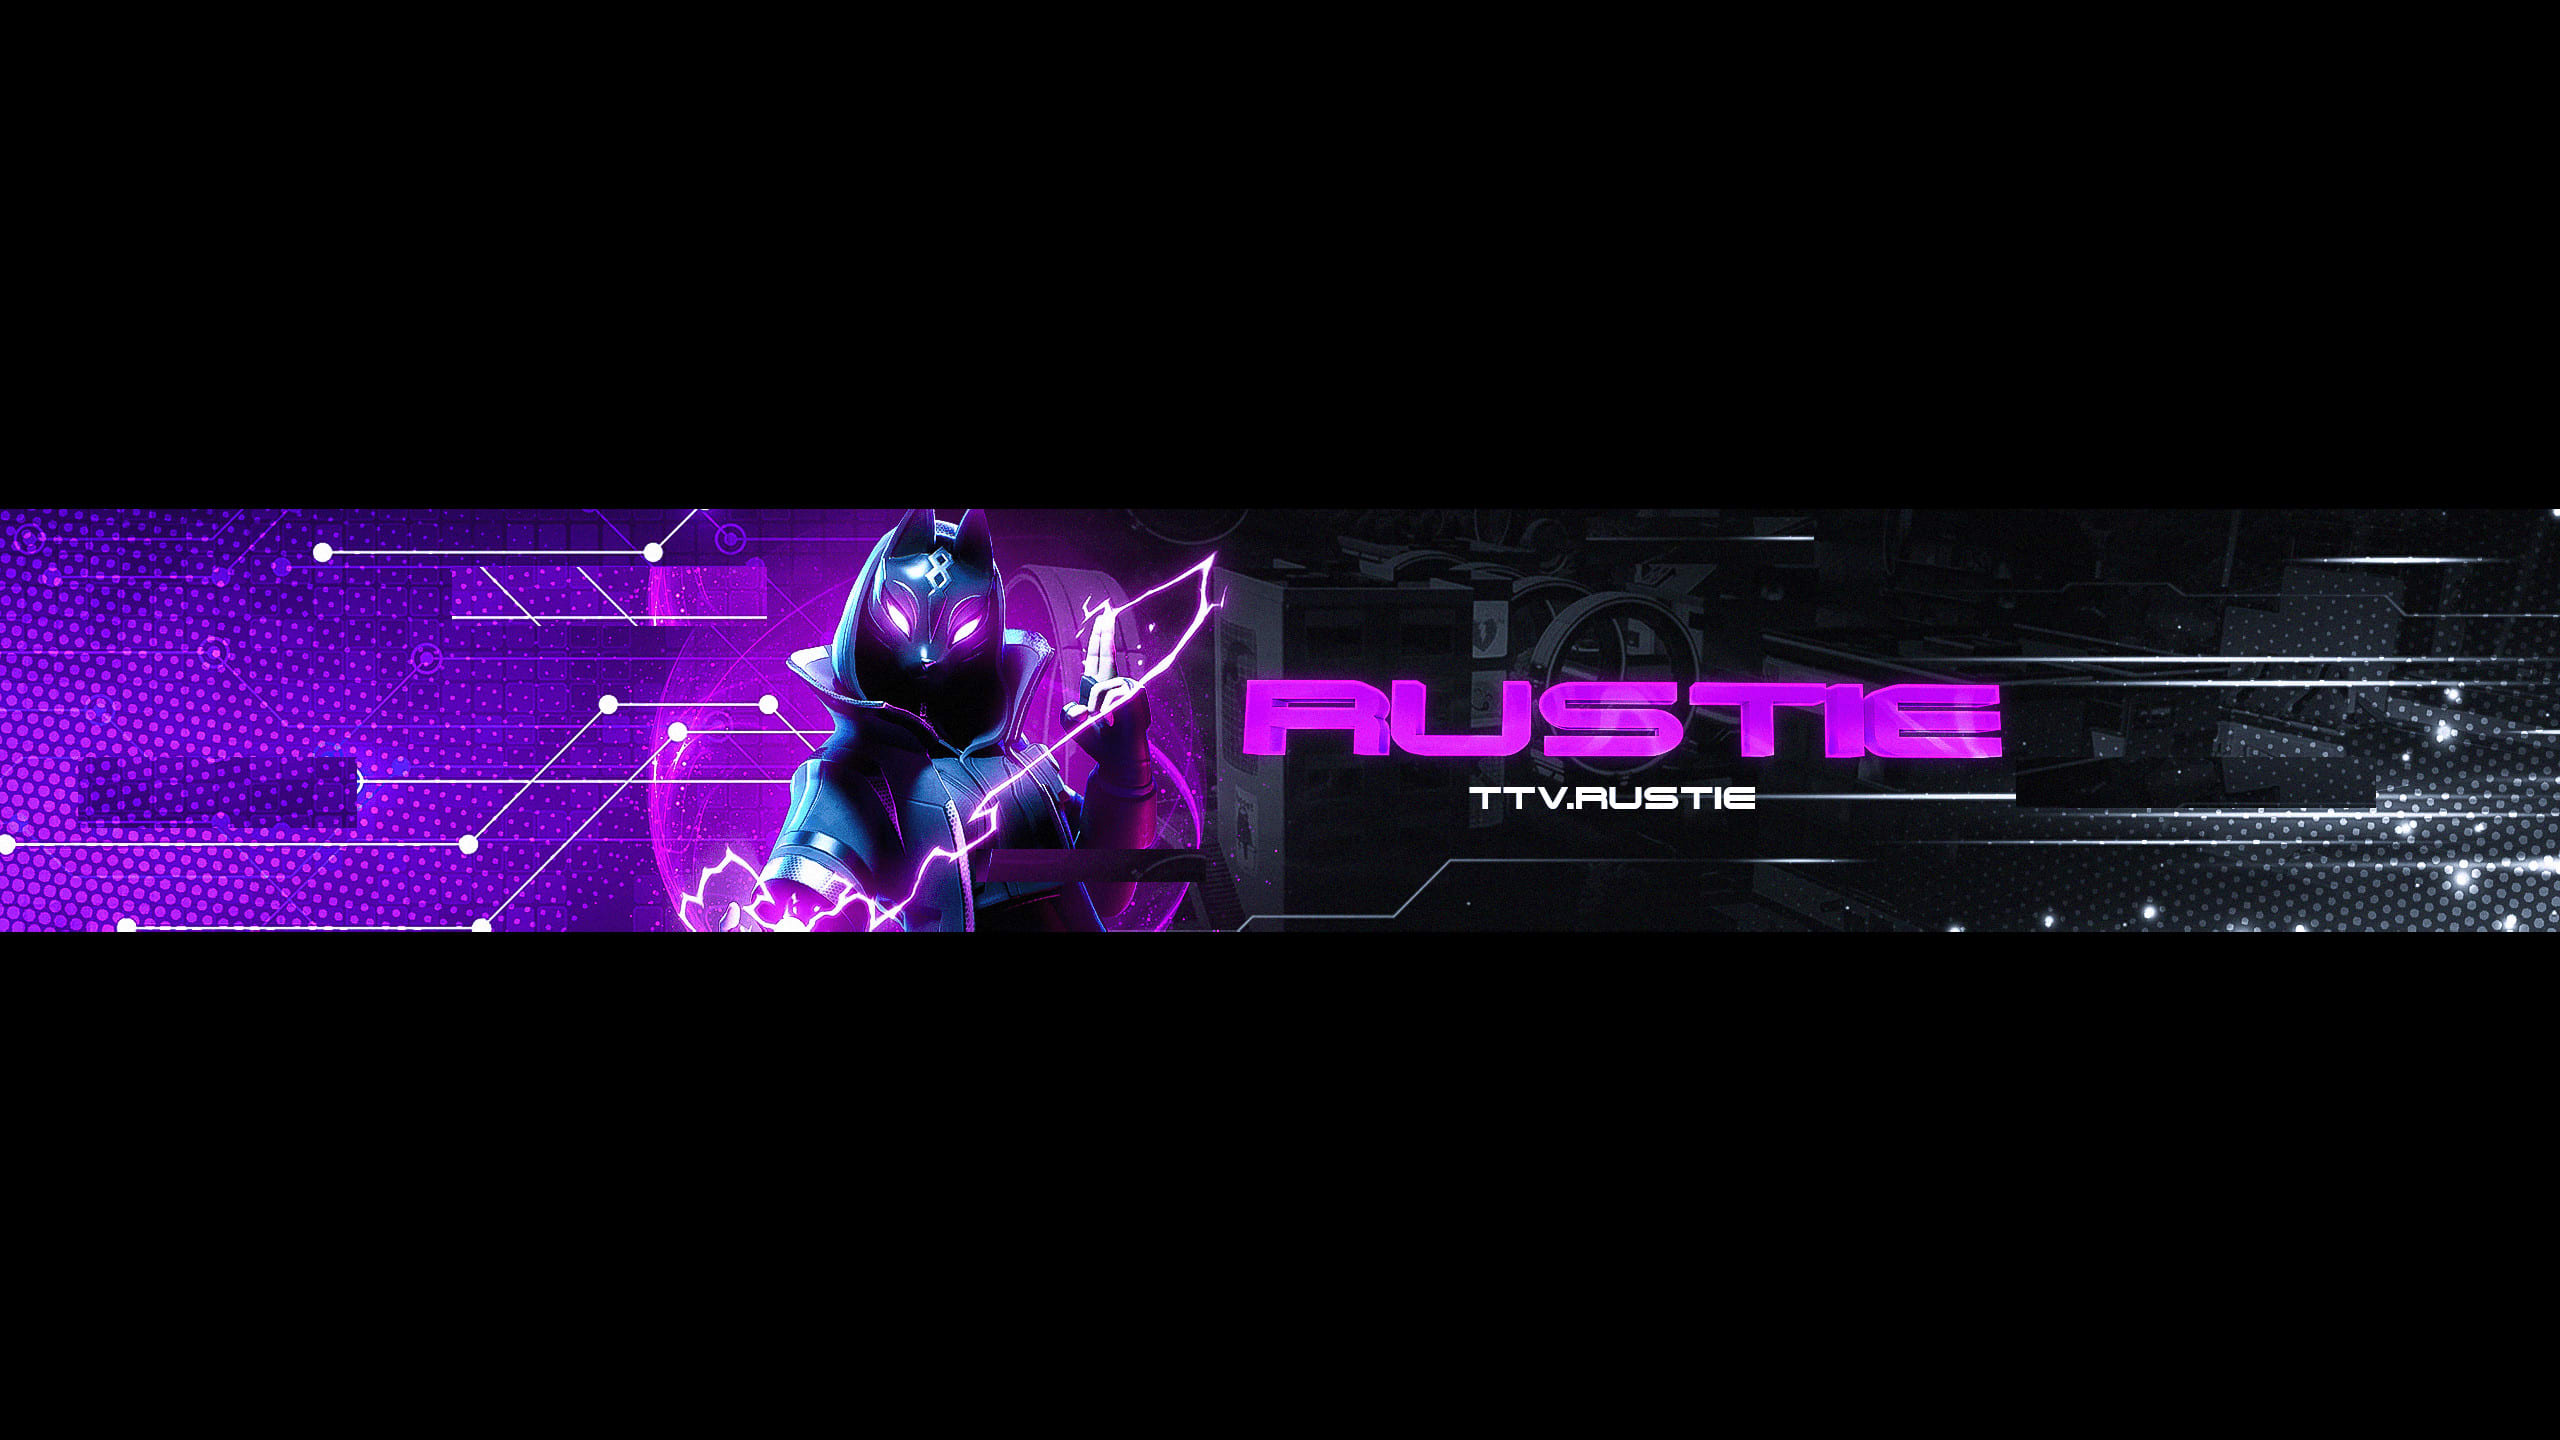 Do A Fortnite Gfx By Ttvrustie